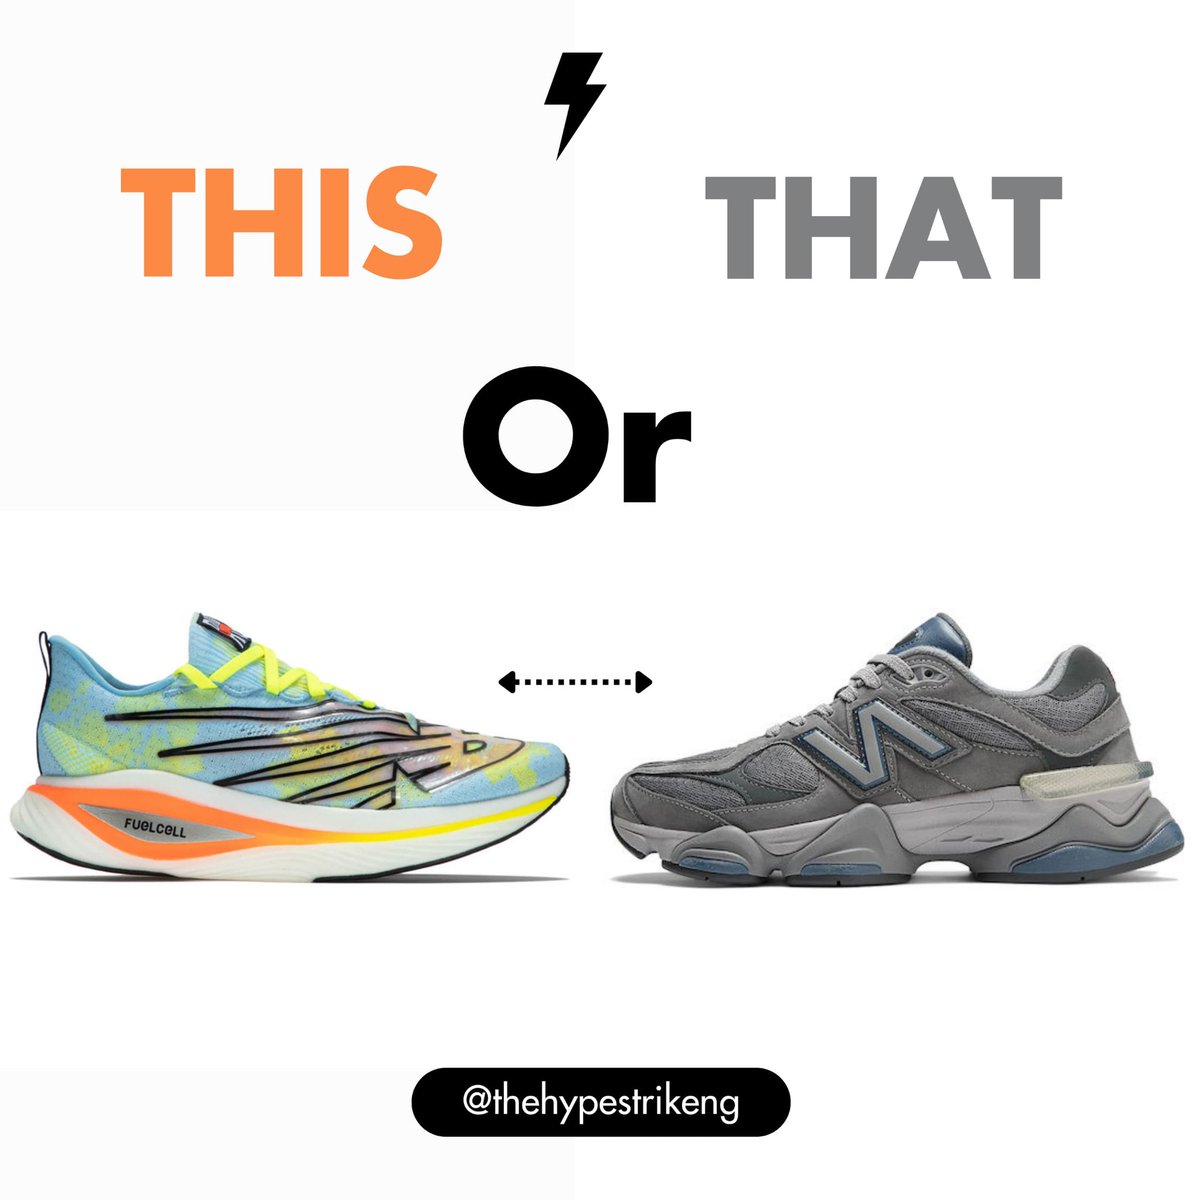 Which would you rather go for? This or That?

Let's know in the comment section! 

#FinalBBB24 #Trending #Dubai #fashiontrends #sneakers